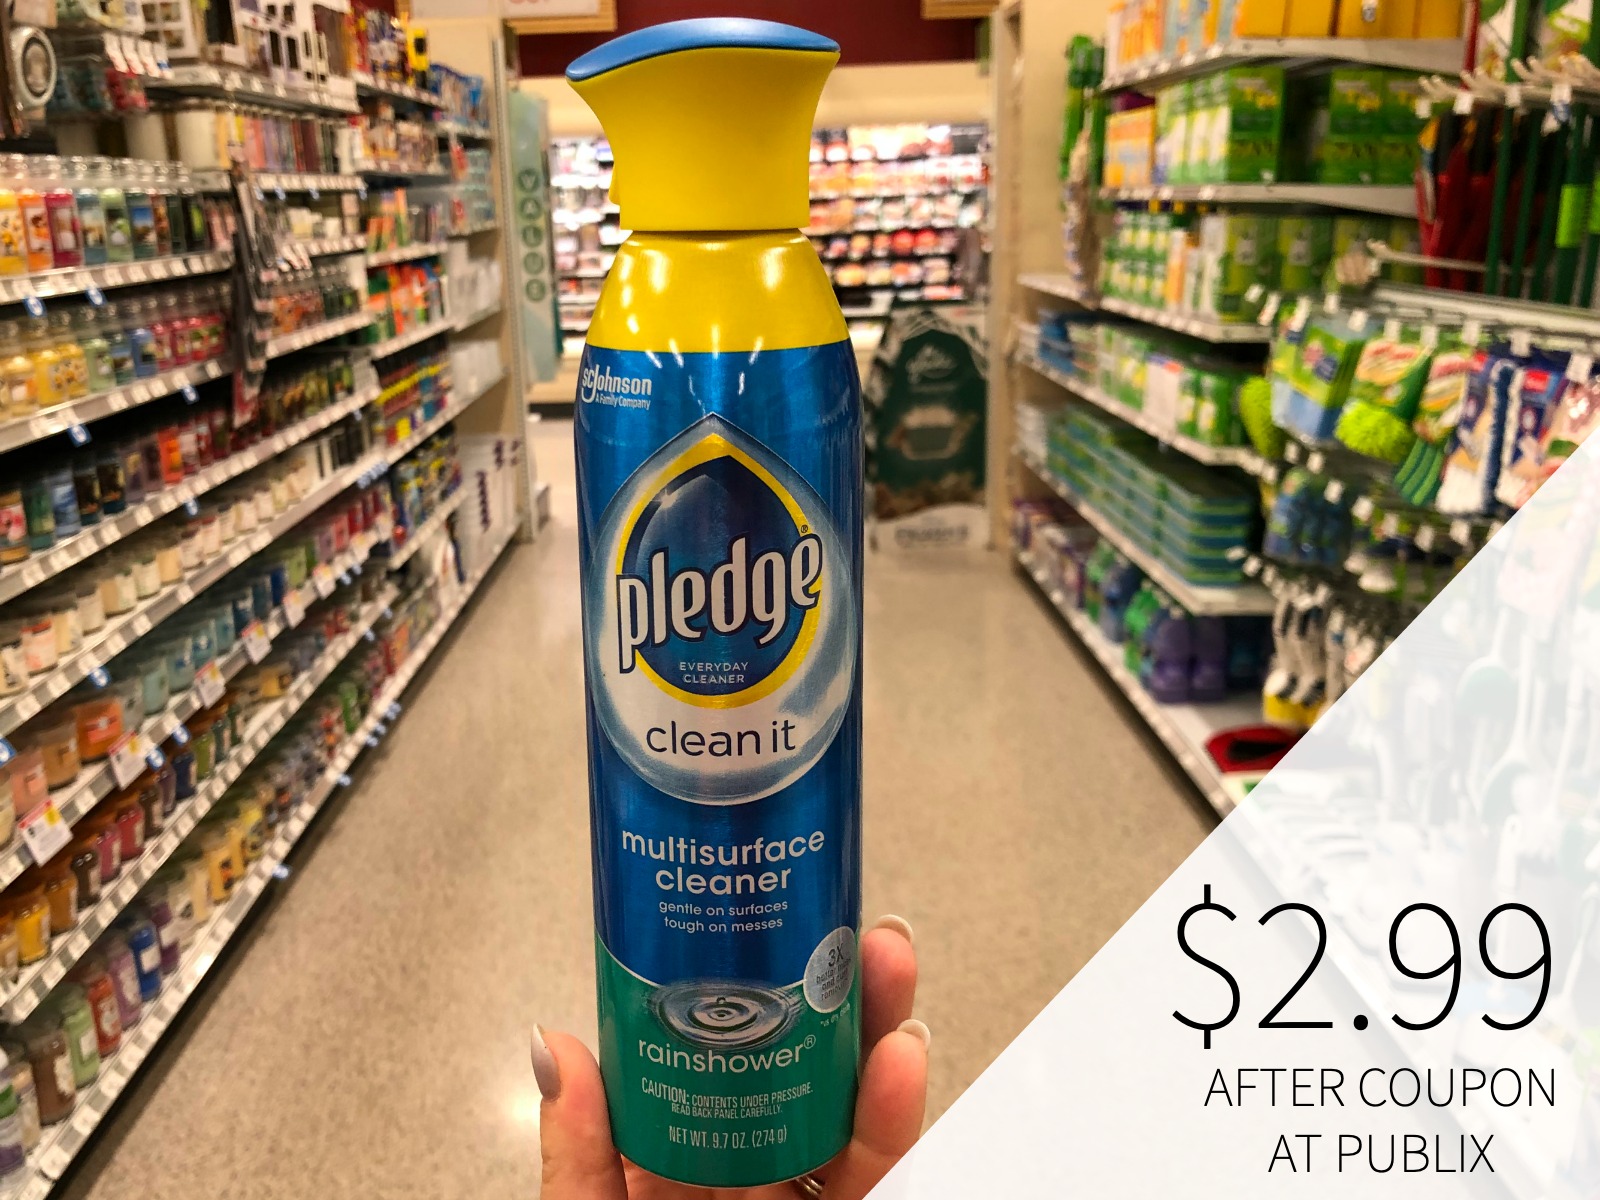 Get Your Home Ready For The Holidays With Pledge® Multisurface Cleaner - Save Now At Publix on I Heart Publix 1